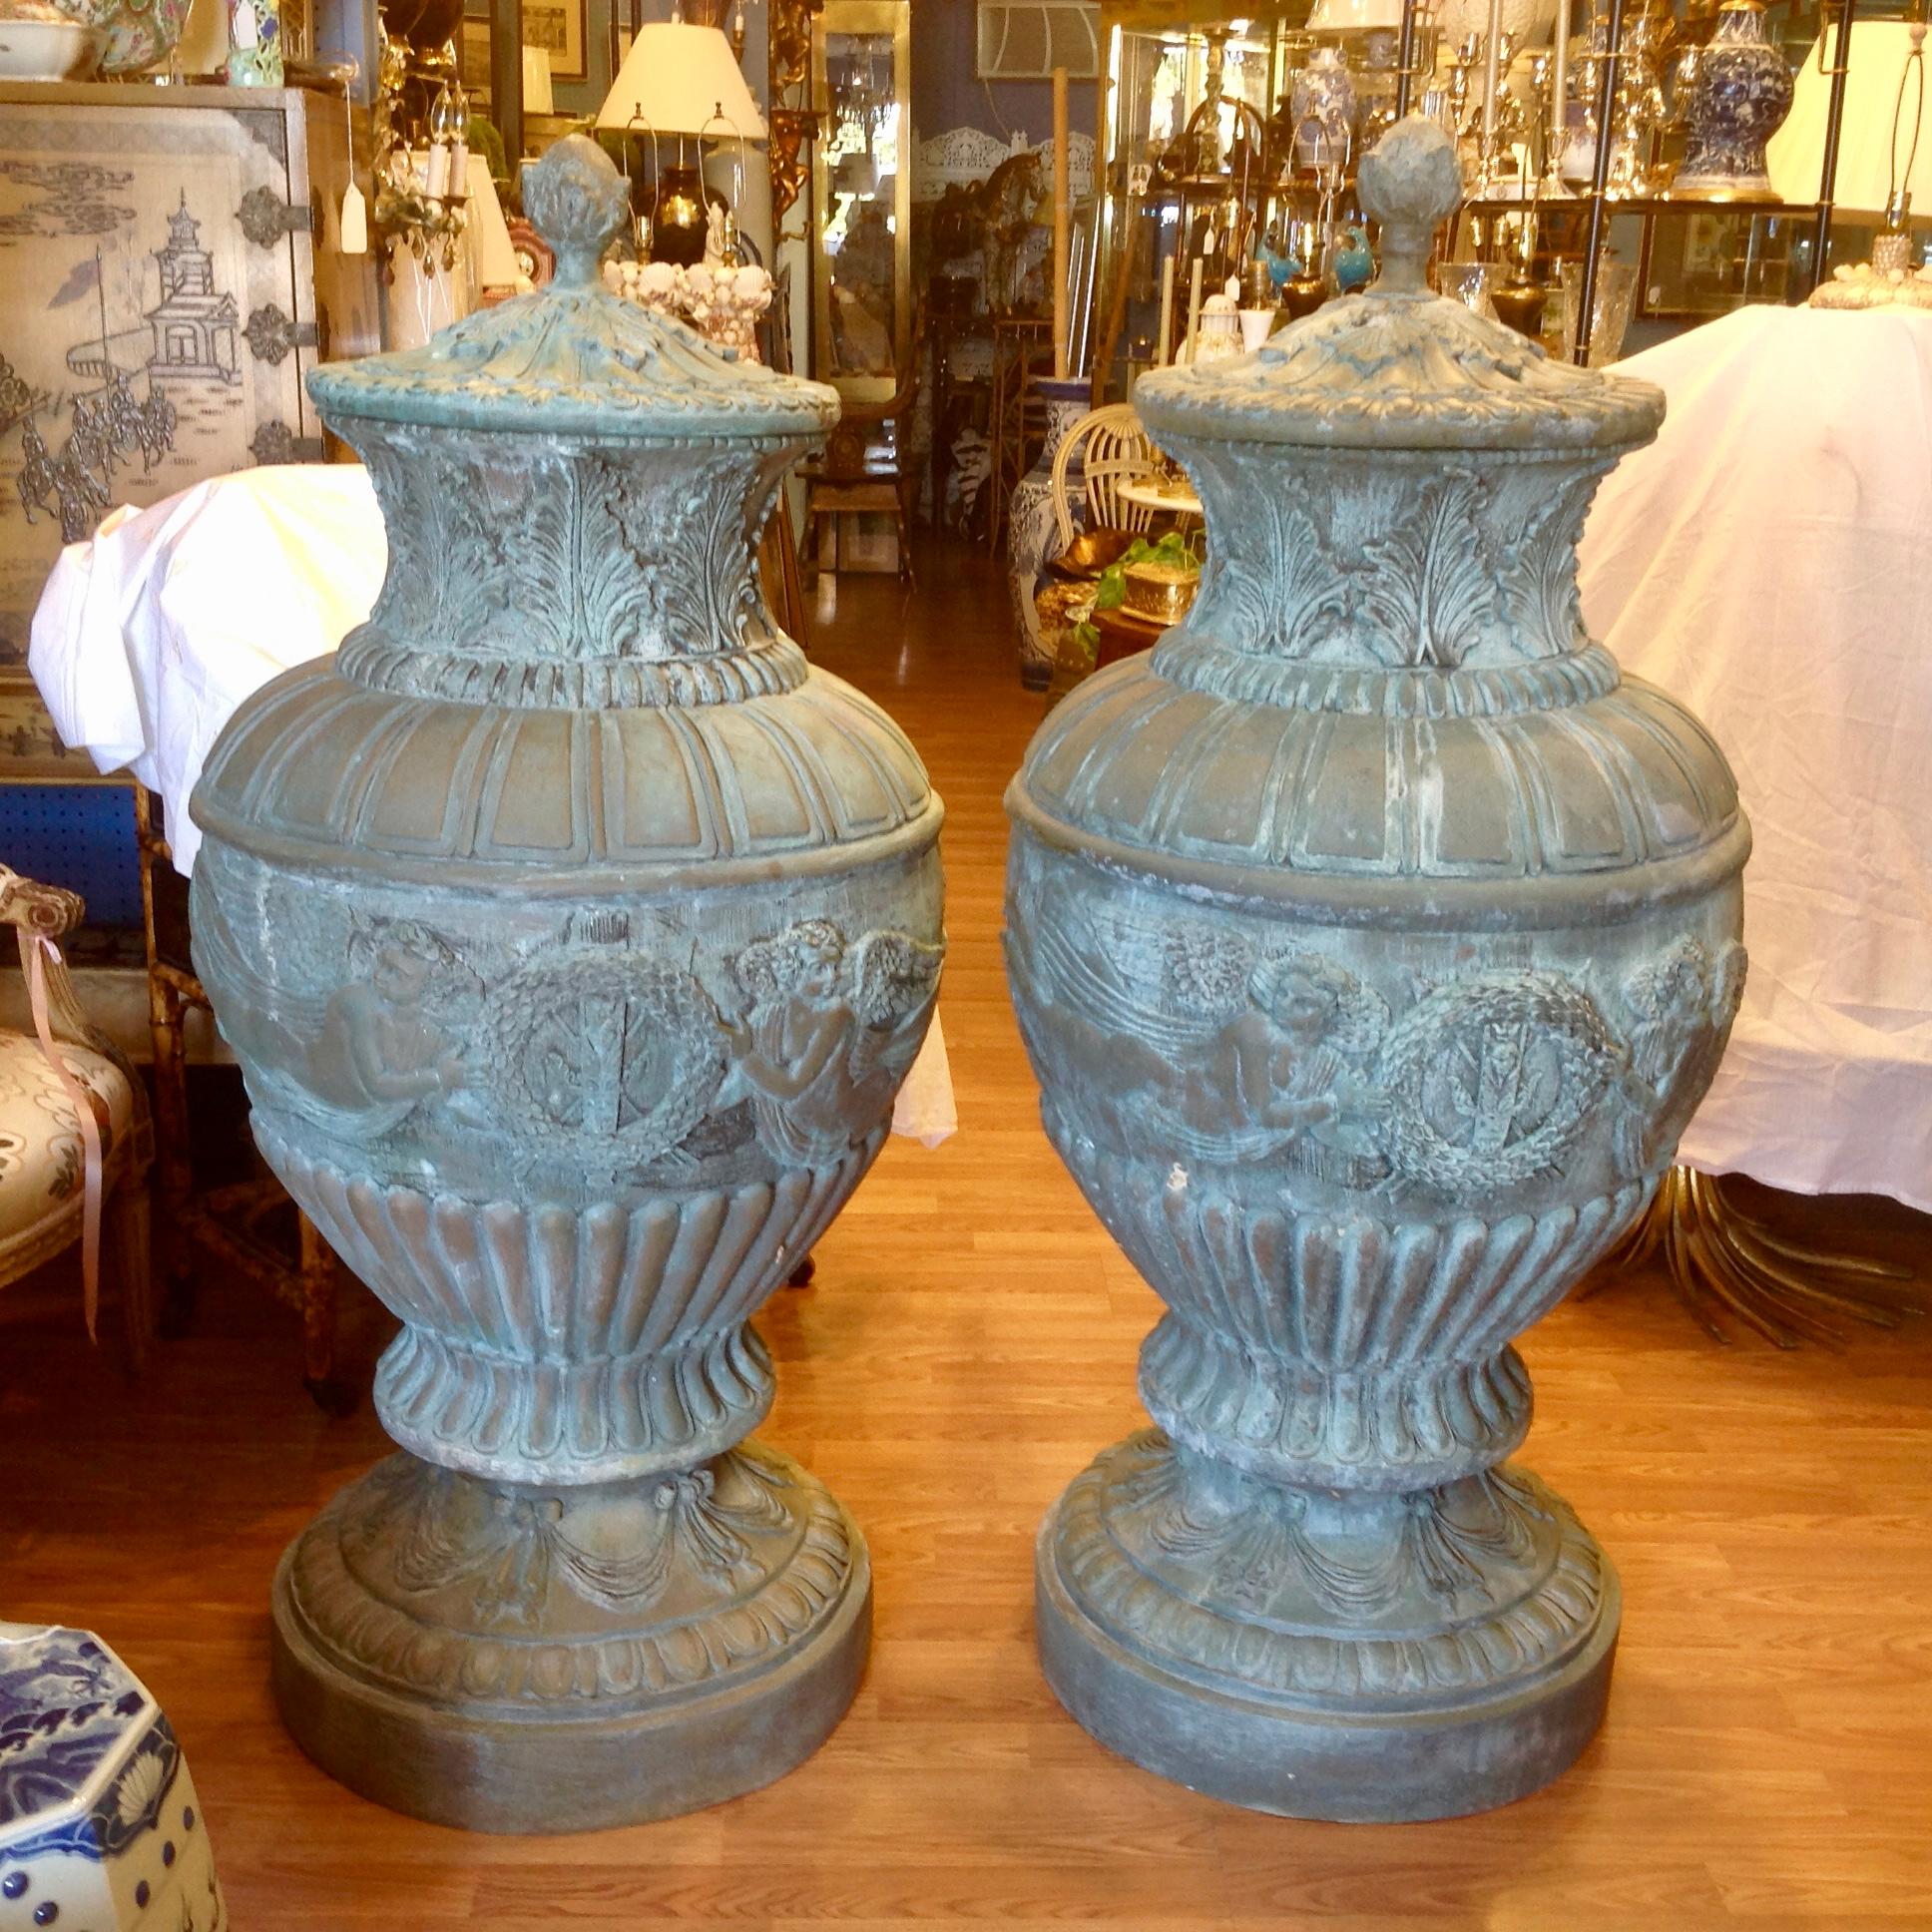 Magnificent detail, scale, and proportions.
The urns are fashioned with neoclassic winged figures, wreaths, and florals.
The Verde Gris patina is varied from outside use - cast in solid bronze.
(The lids are removable).